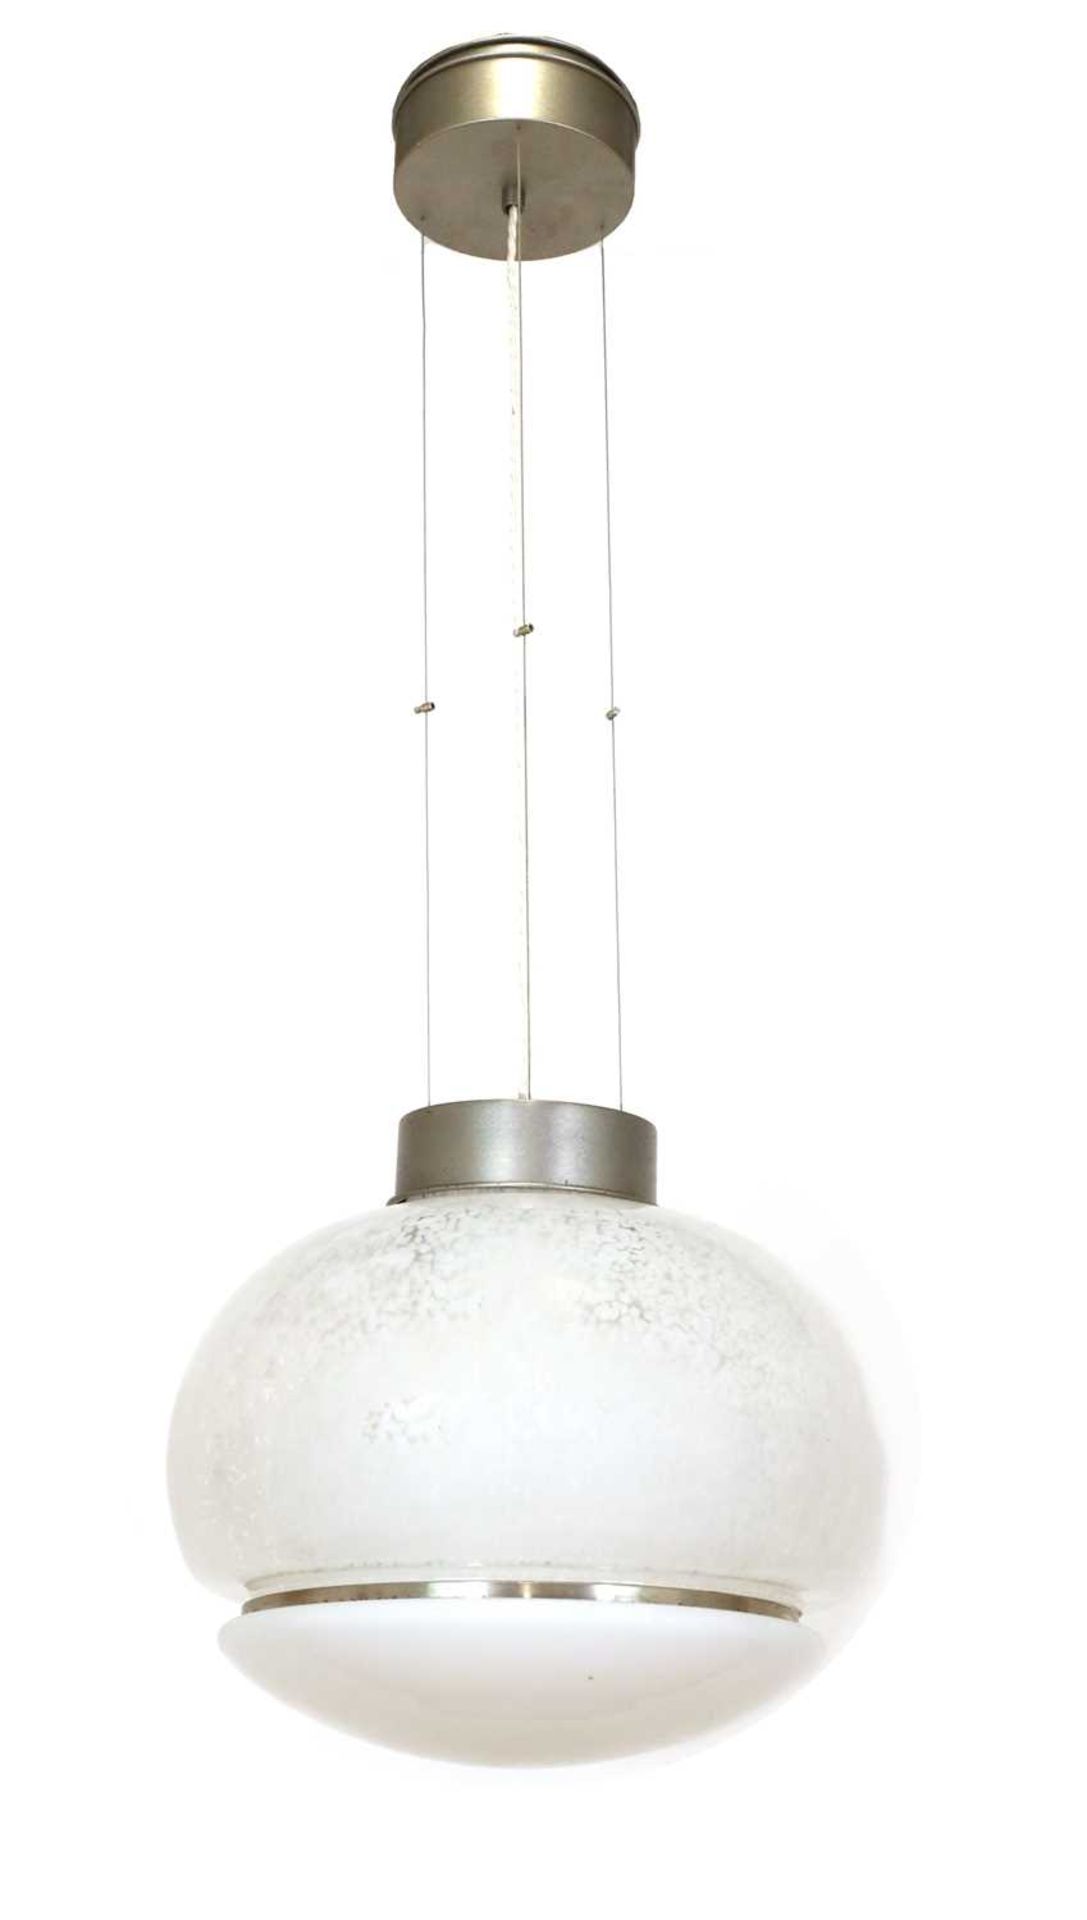 A large Murano glass sphere ceiling light,